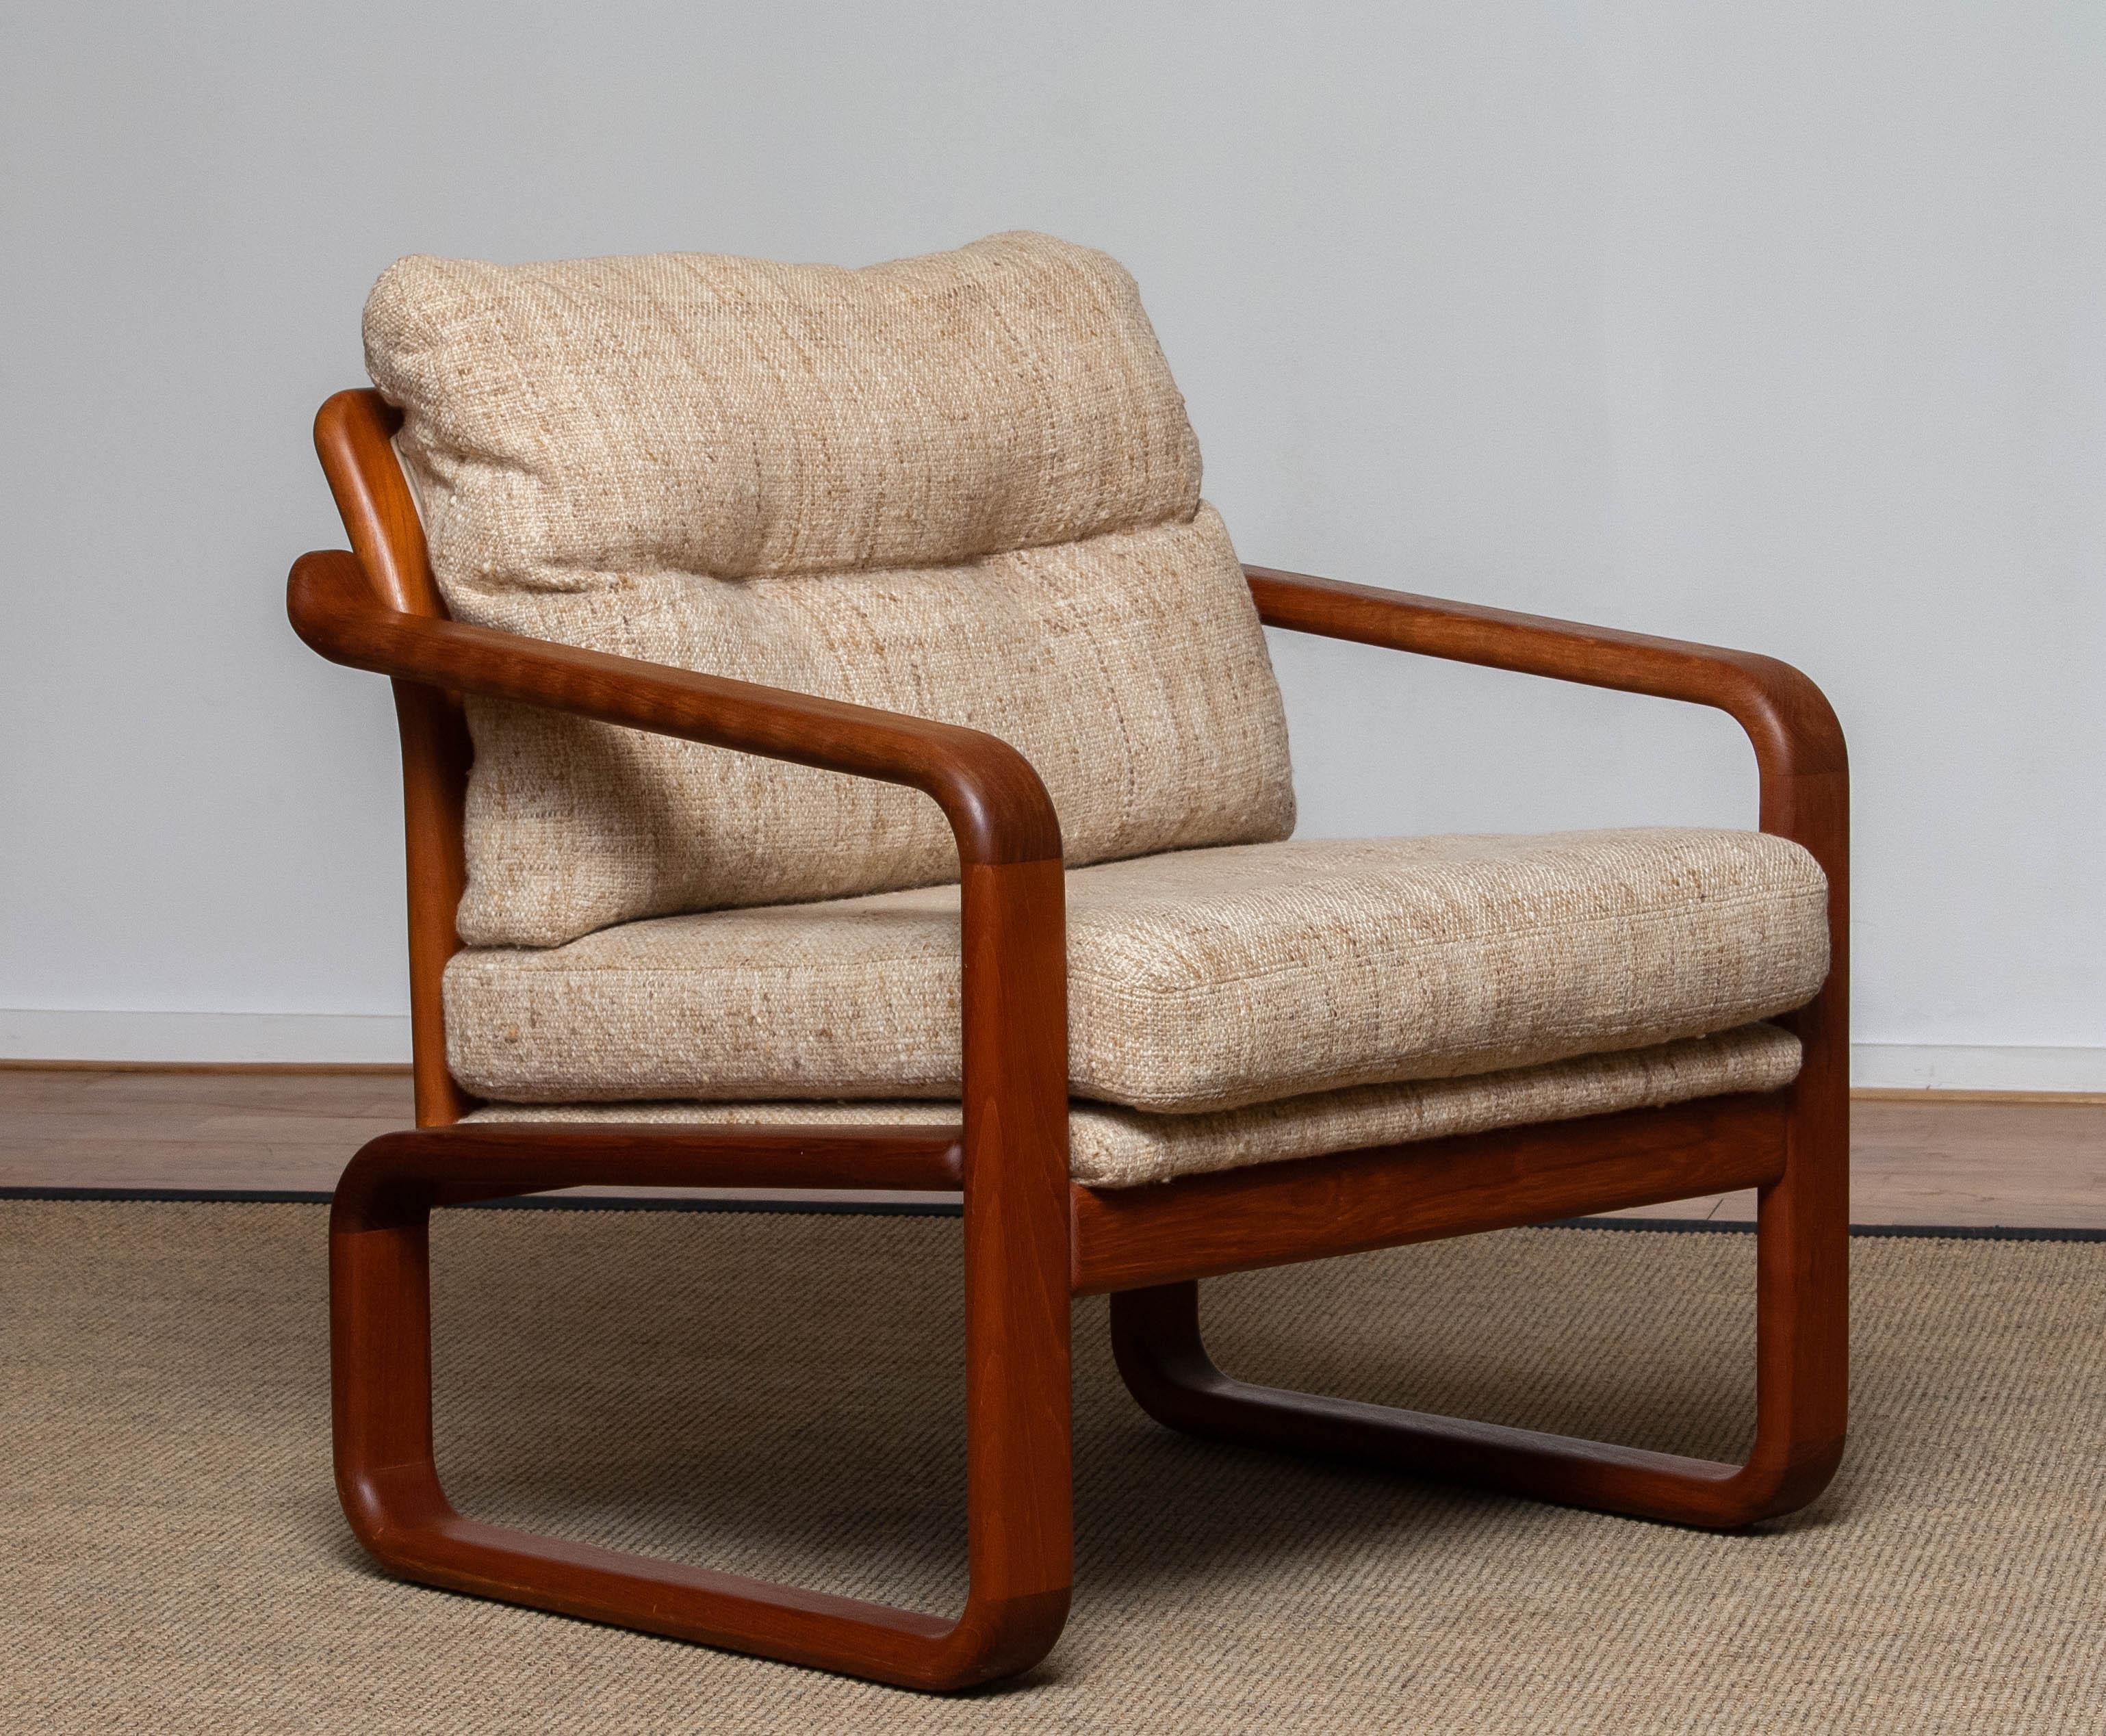 1980's Teak with Wool Cushions Lounge / Easy / Club Chair by HS Design Denmark In Good Condition For Sale In Silvolde, Gelderland